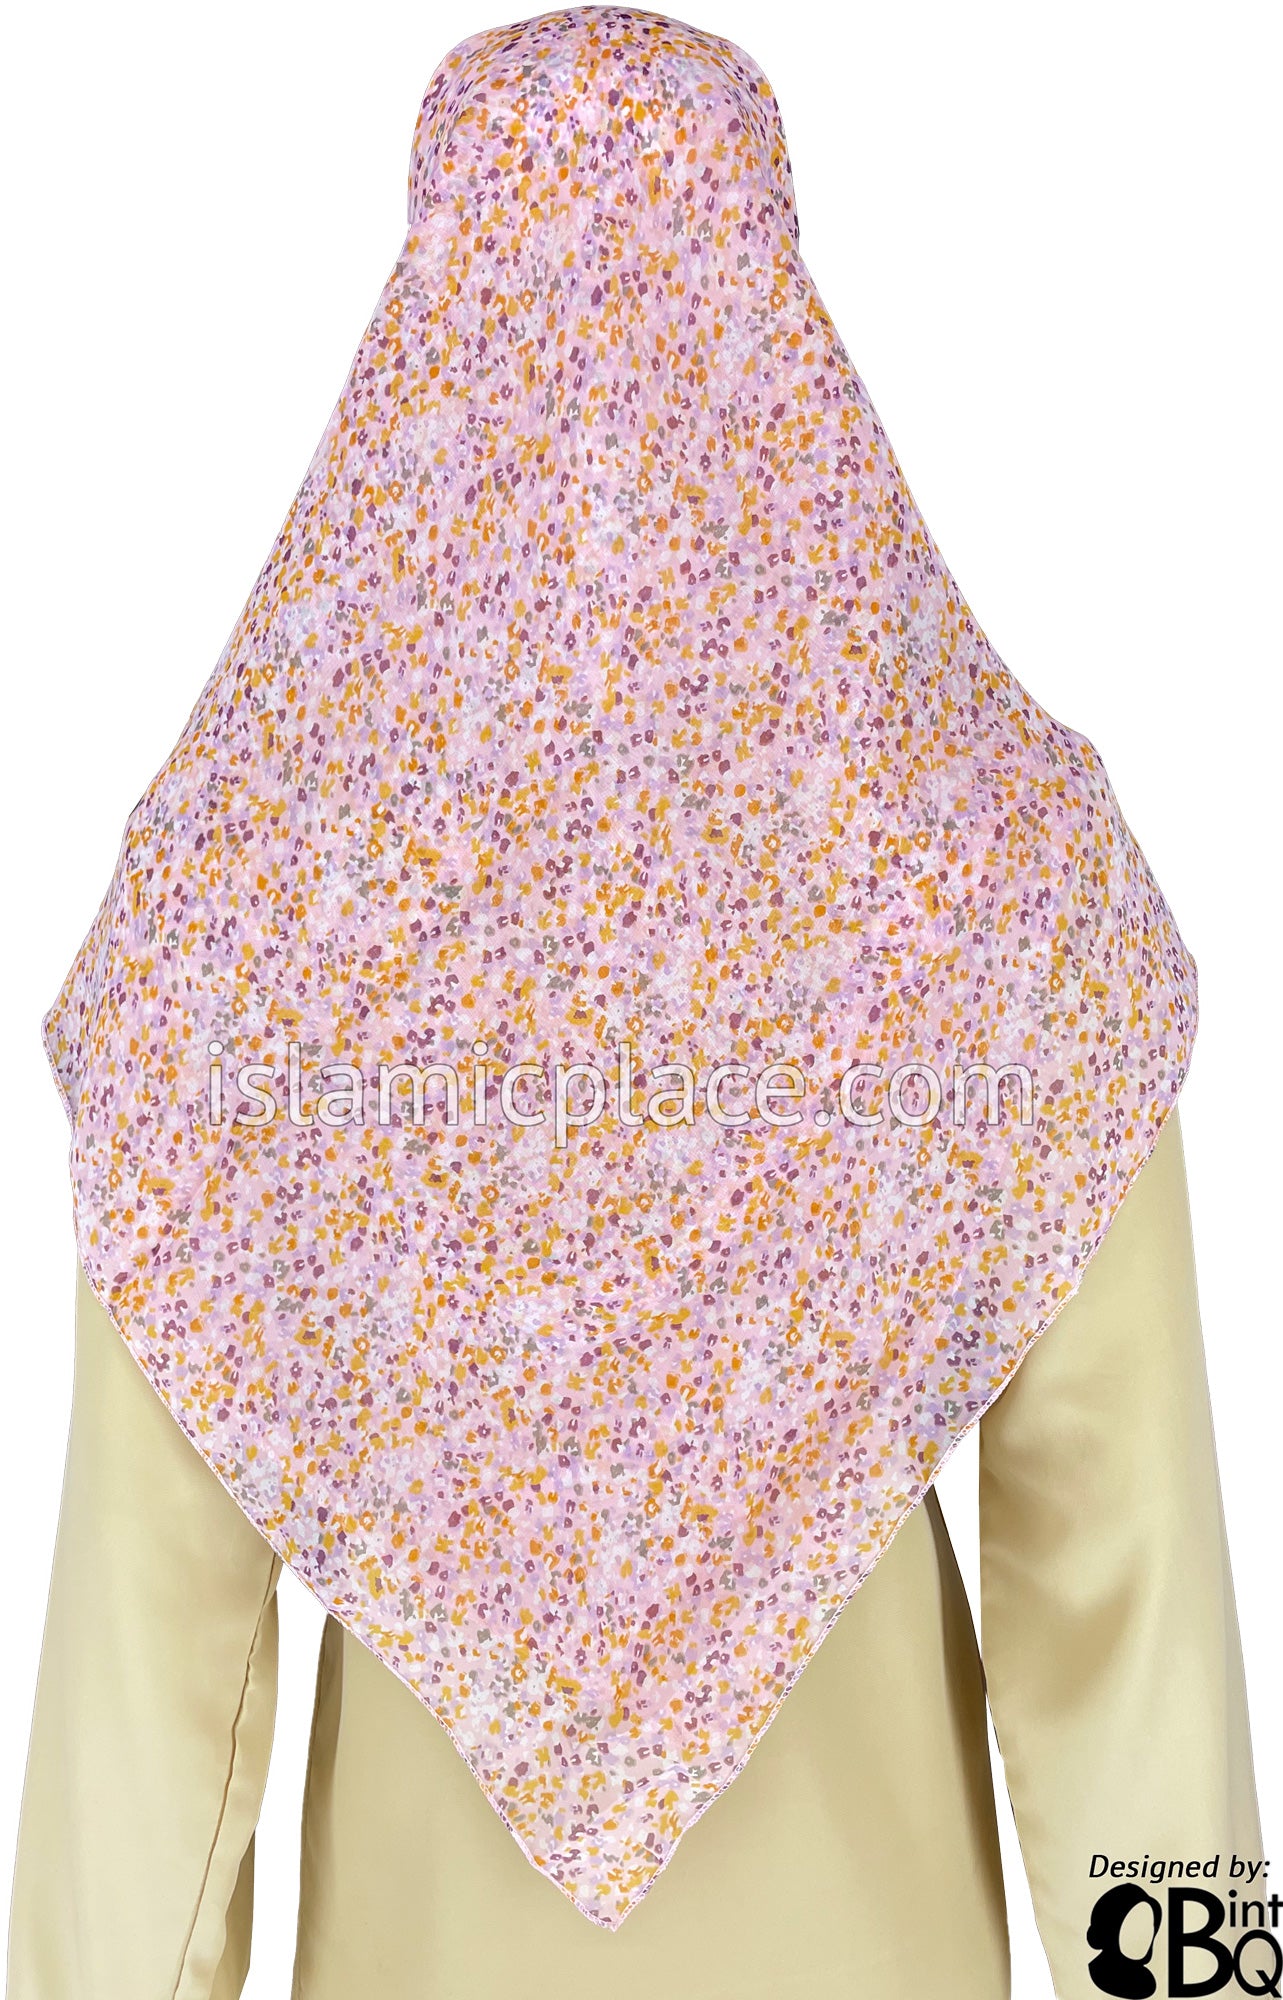 Muave, Mustard and Gray Flowers on Baby Pink Base - 45" Square Printed Khimar